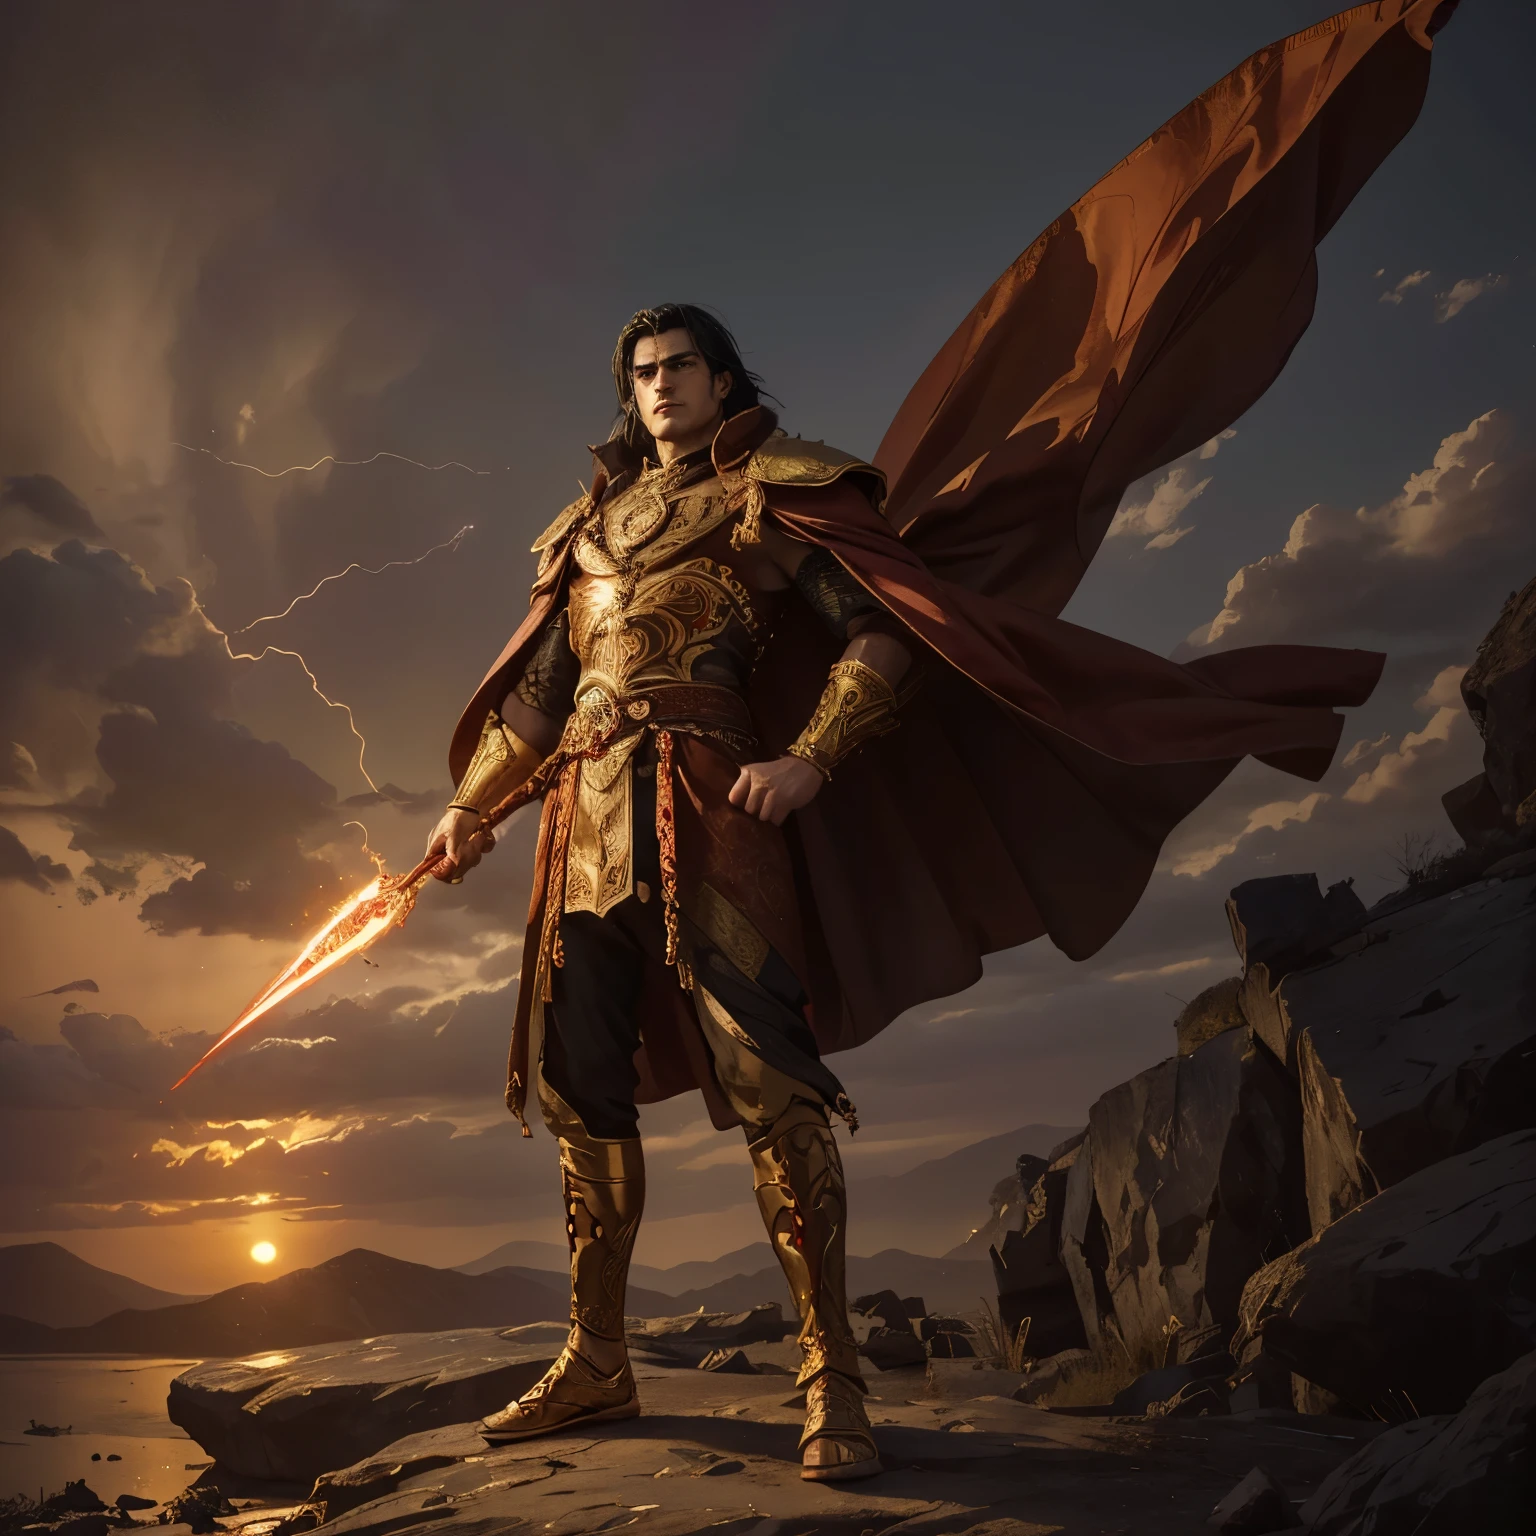 Generate highly detailed, high-quality images of a 25-year-old tall young man with pale skin, small brown eyes, a prominent nose, and thick eyebrows. Clean-shaven with a defined jawline, he has long black hair with a single gray strand. In a full-body image, depict him standing on a dark rock in an imposing pose, embodying the essence of a grand holy warrior.

Adorned in opulent red fabrics inspired by Byzantine aesthetics, featuring intricate golden patterns, he wears a full golden body armor and a long red cape. A ruby jewel graces his forehead. The calamitous background includes destruction, lightning, and fire, with the rising sun symbolizing hope on the horizon.

Capture the character covered in his own blood, bearing wounds, surrounded by intense magical red energy swirling around his body. Emphasize the highest quality and intricate details to vividly bring this compelling scene to life.